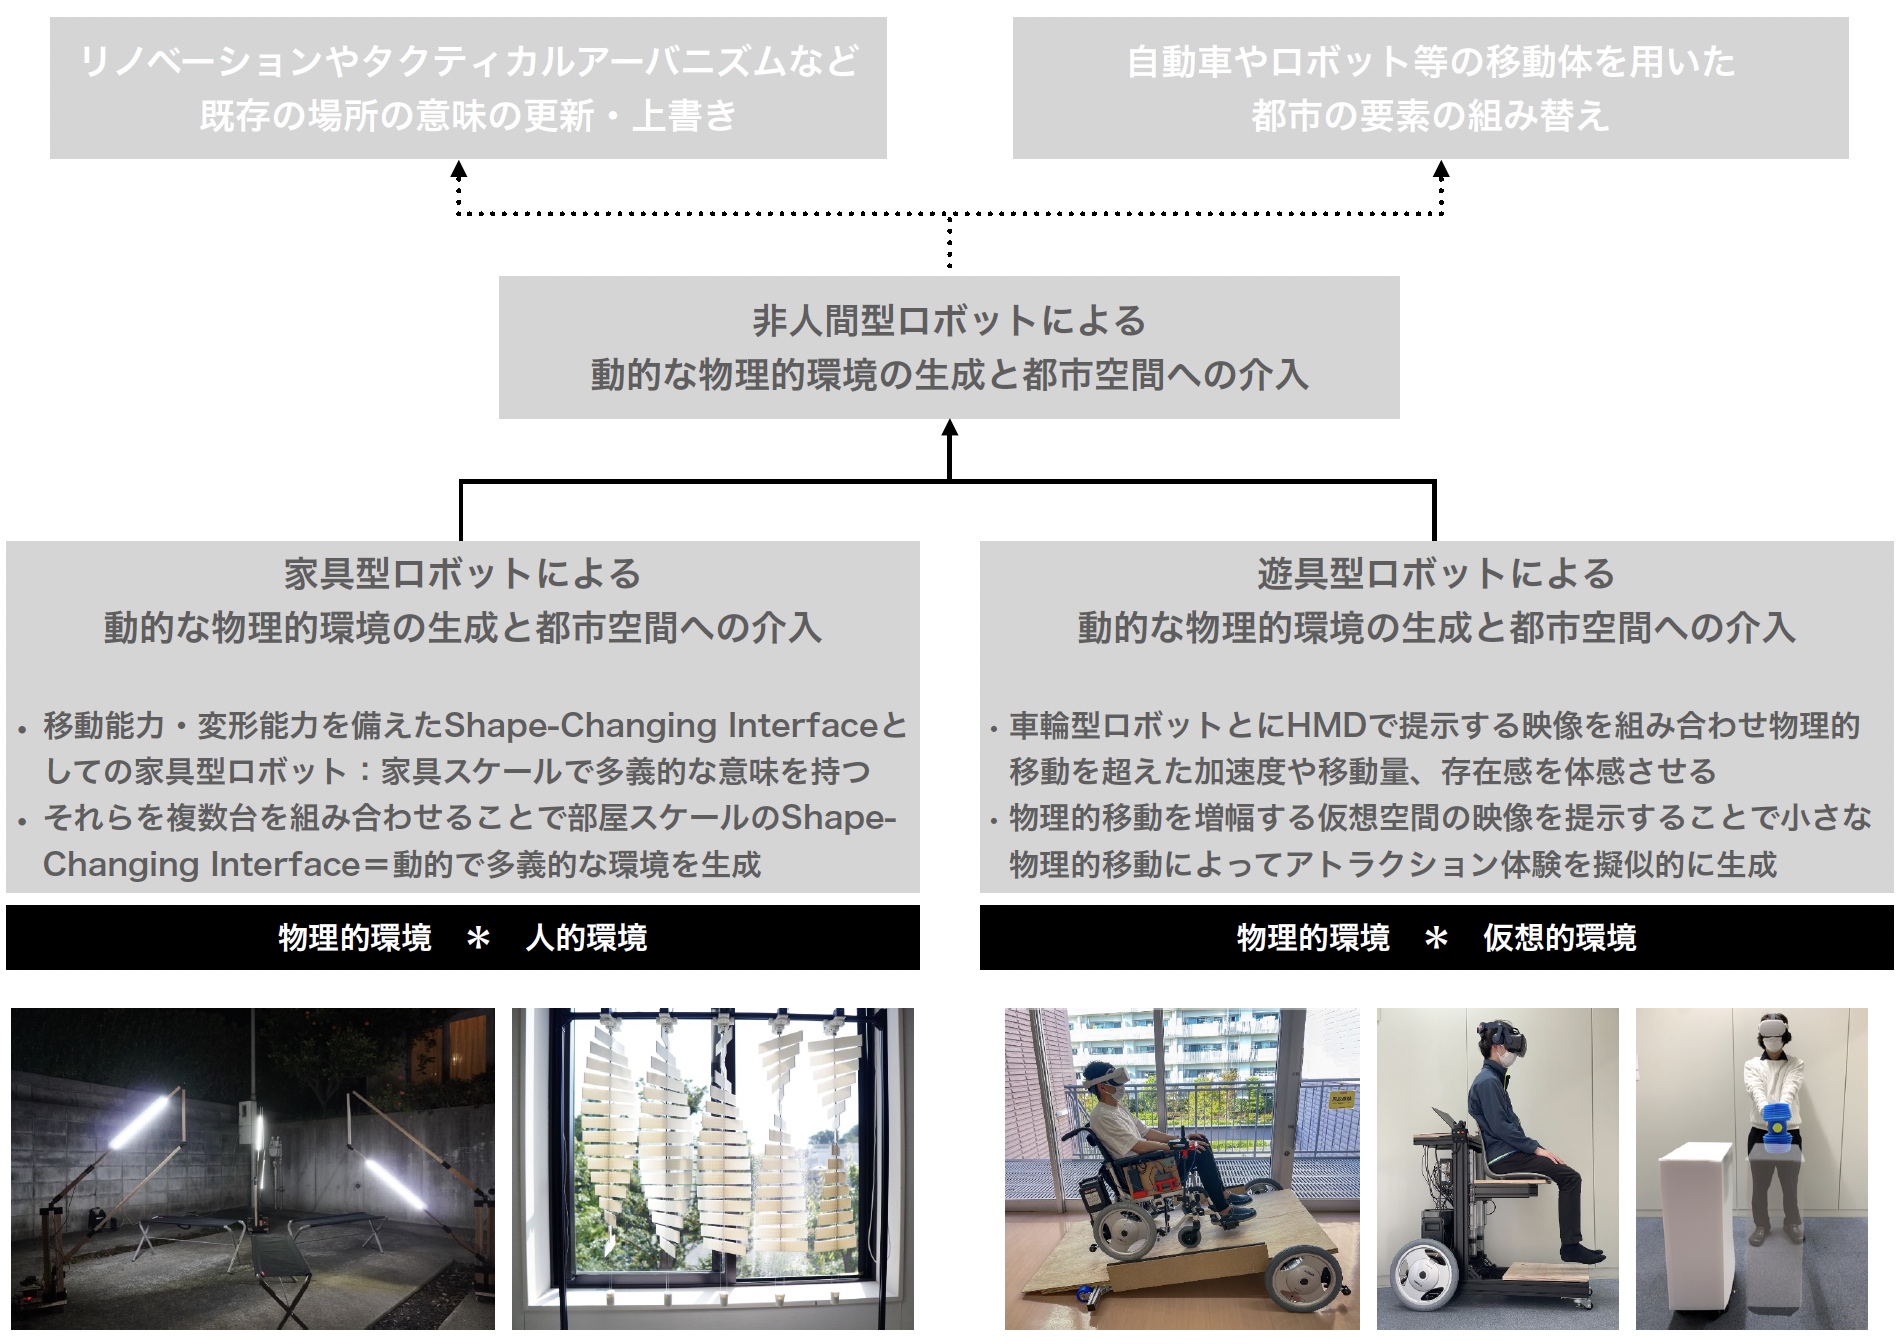 Research Subject 2: Human City Interaction with non-human like robots